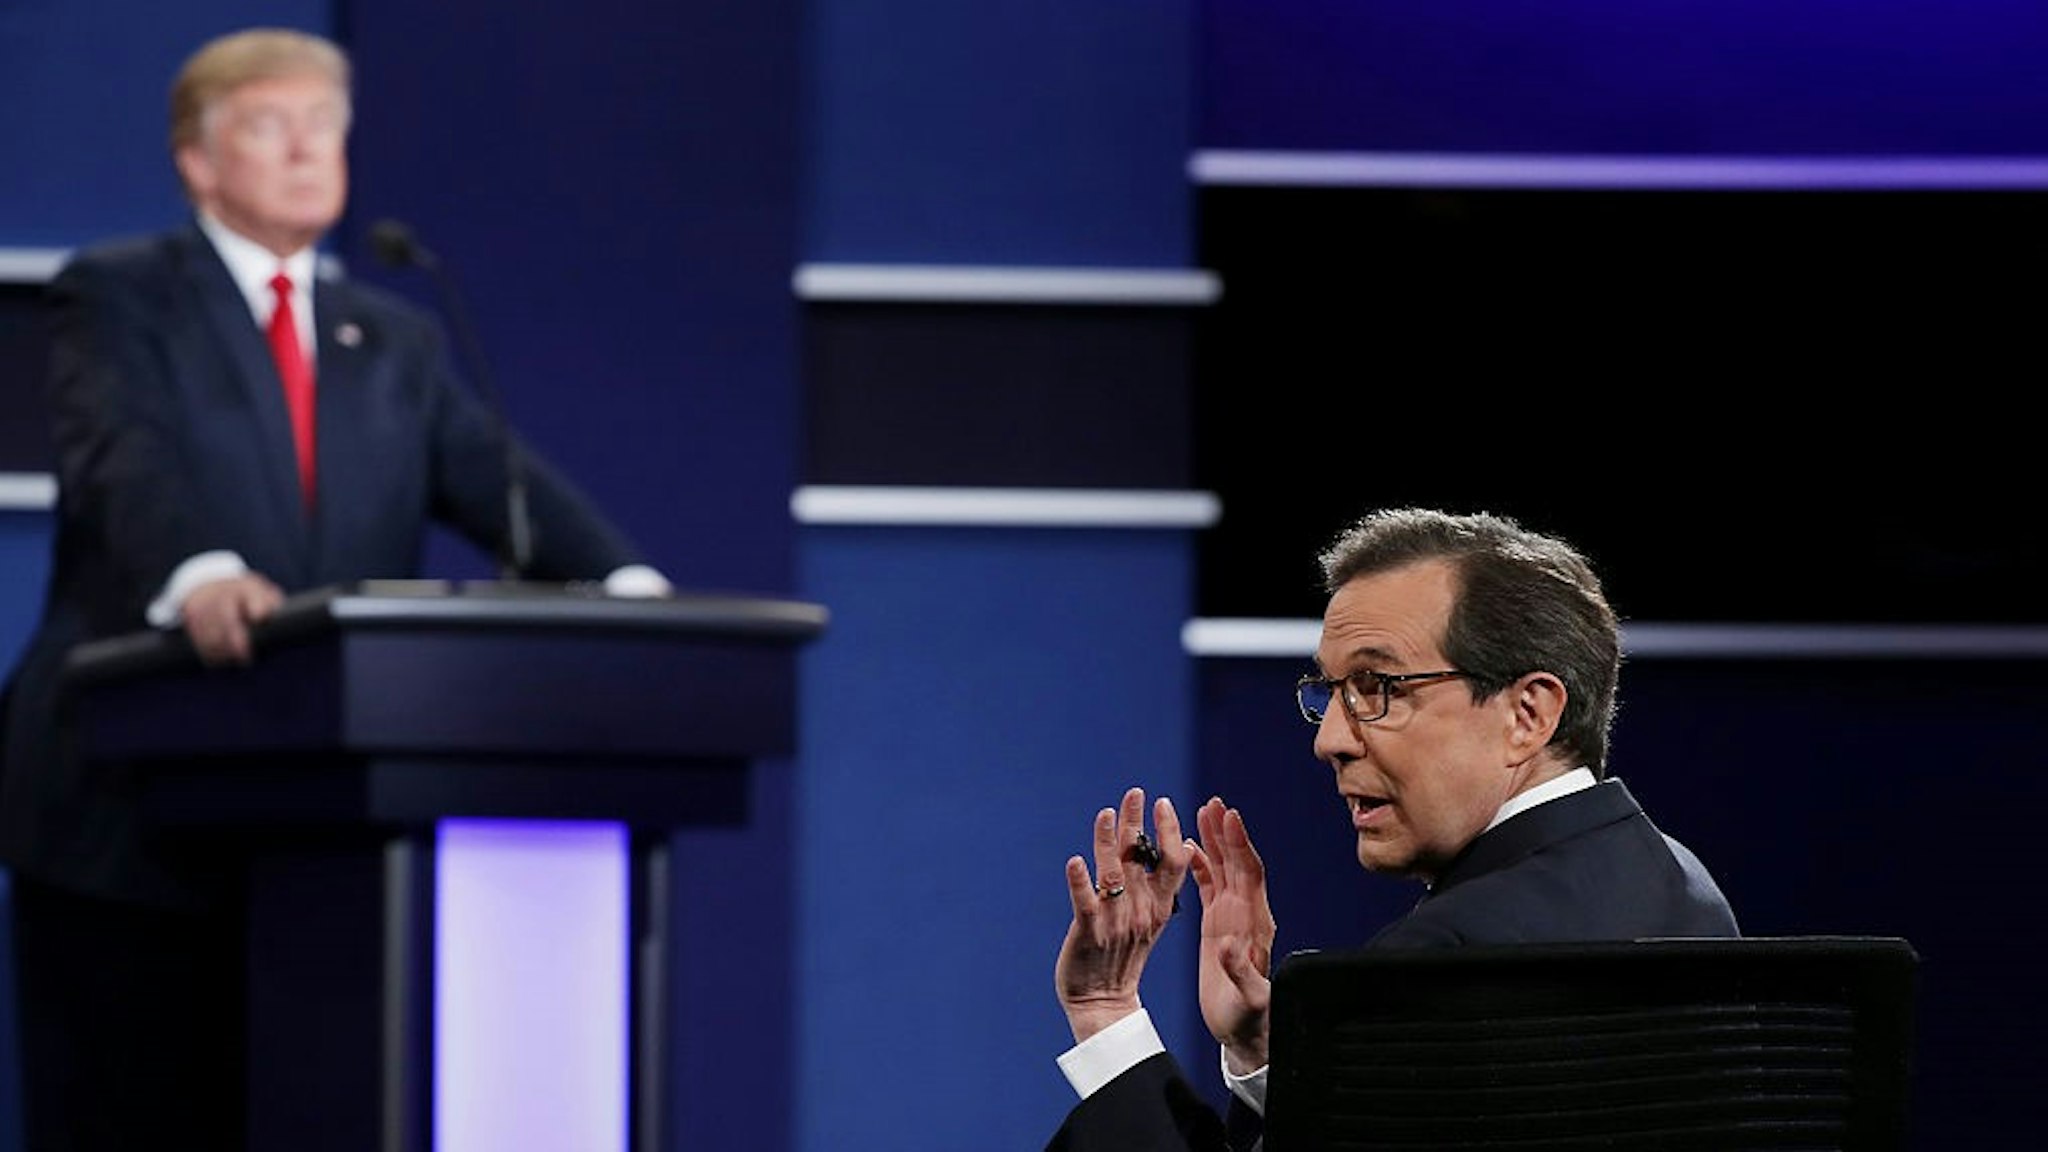 LAS VEGAS, NV - OCTOBER 19: Fox News anchor and moderator Chris Wallace quiets the audience during the third U.S. presidential debate at the Thomas &amp; Mack Center on October 19, 2016 in Las Vegas, Nevada. Tonight is the final debate ahead of Election Day on November 8. (Photo by